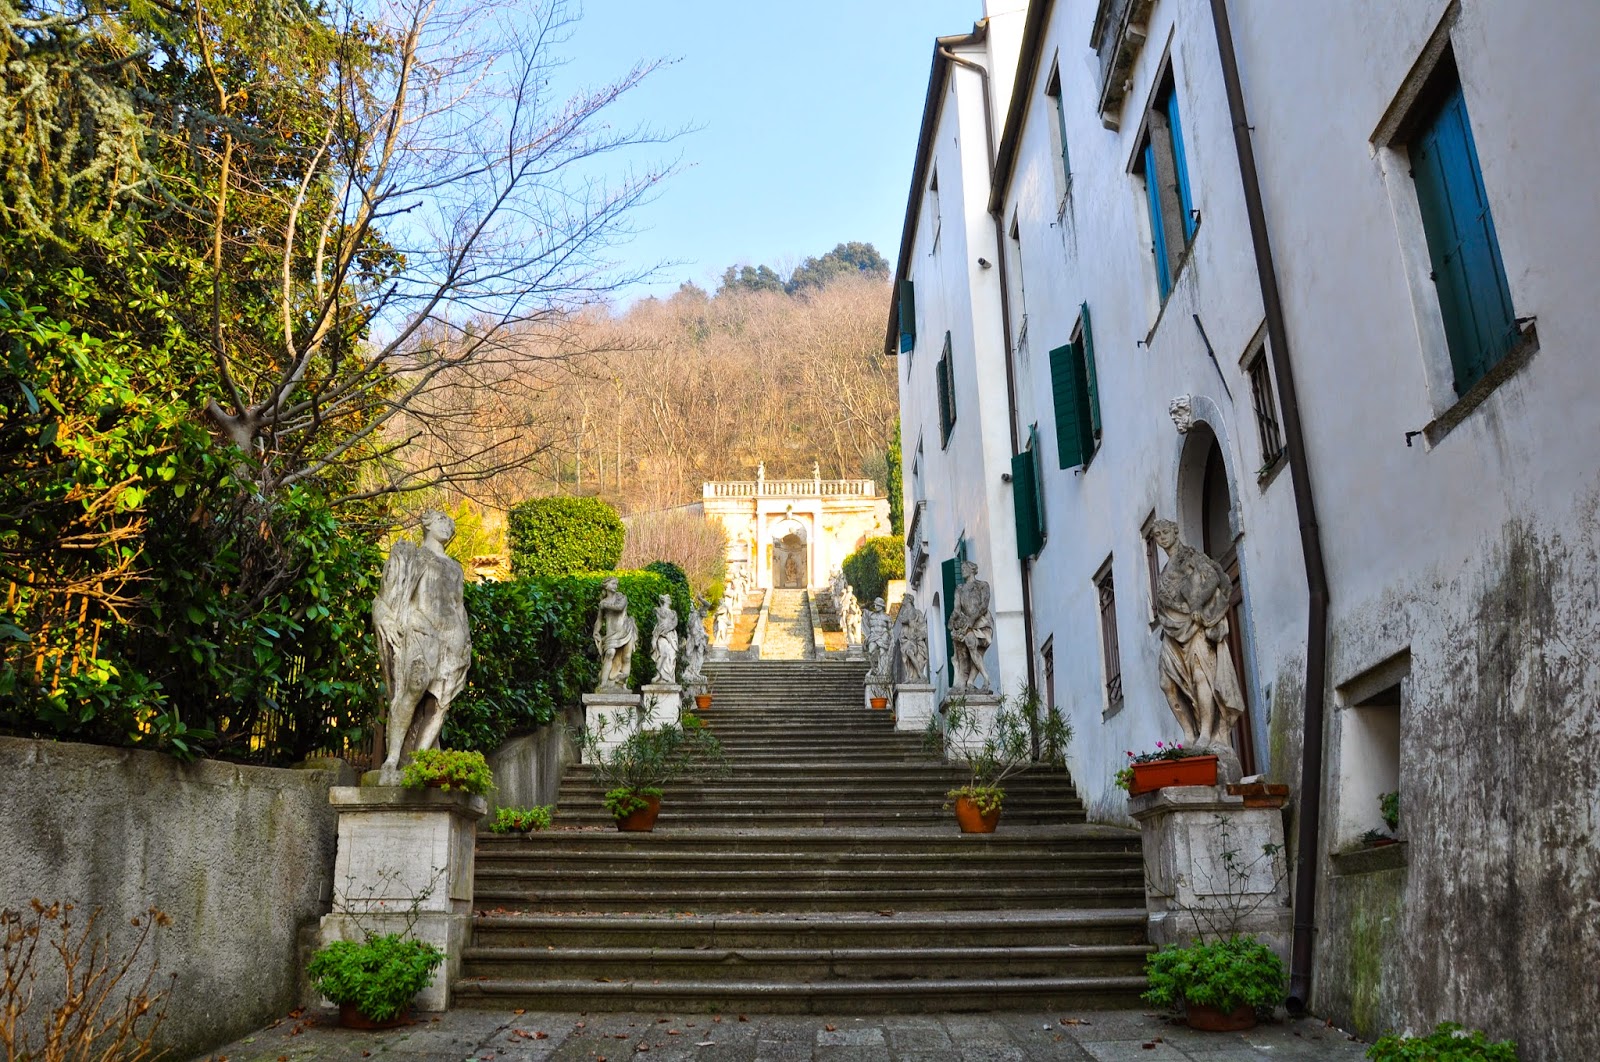 The stairs, Monselice, Colli Euganei